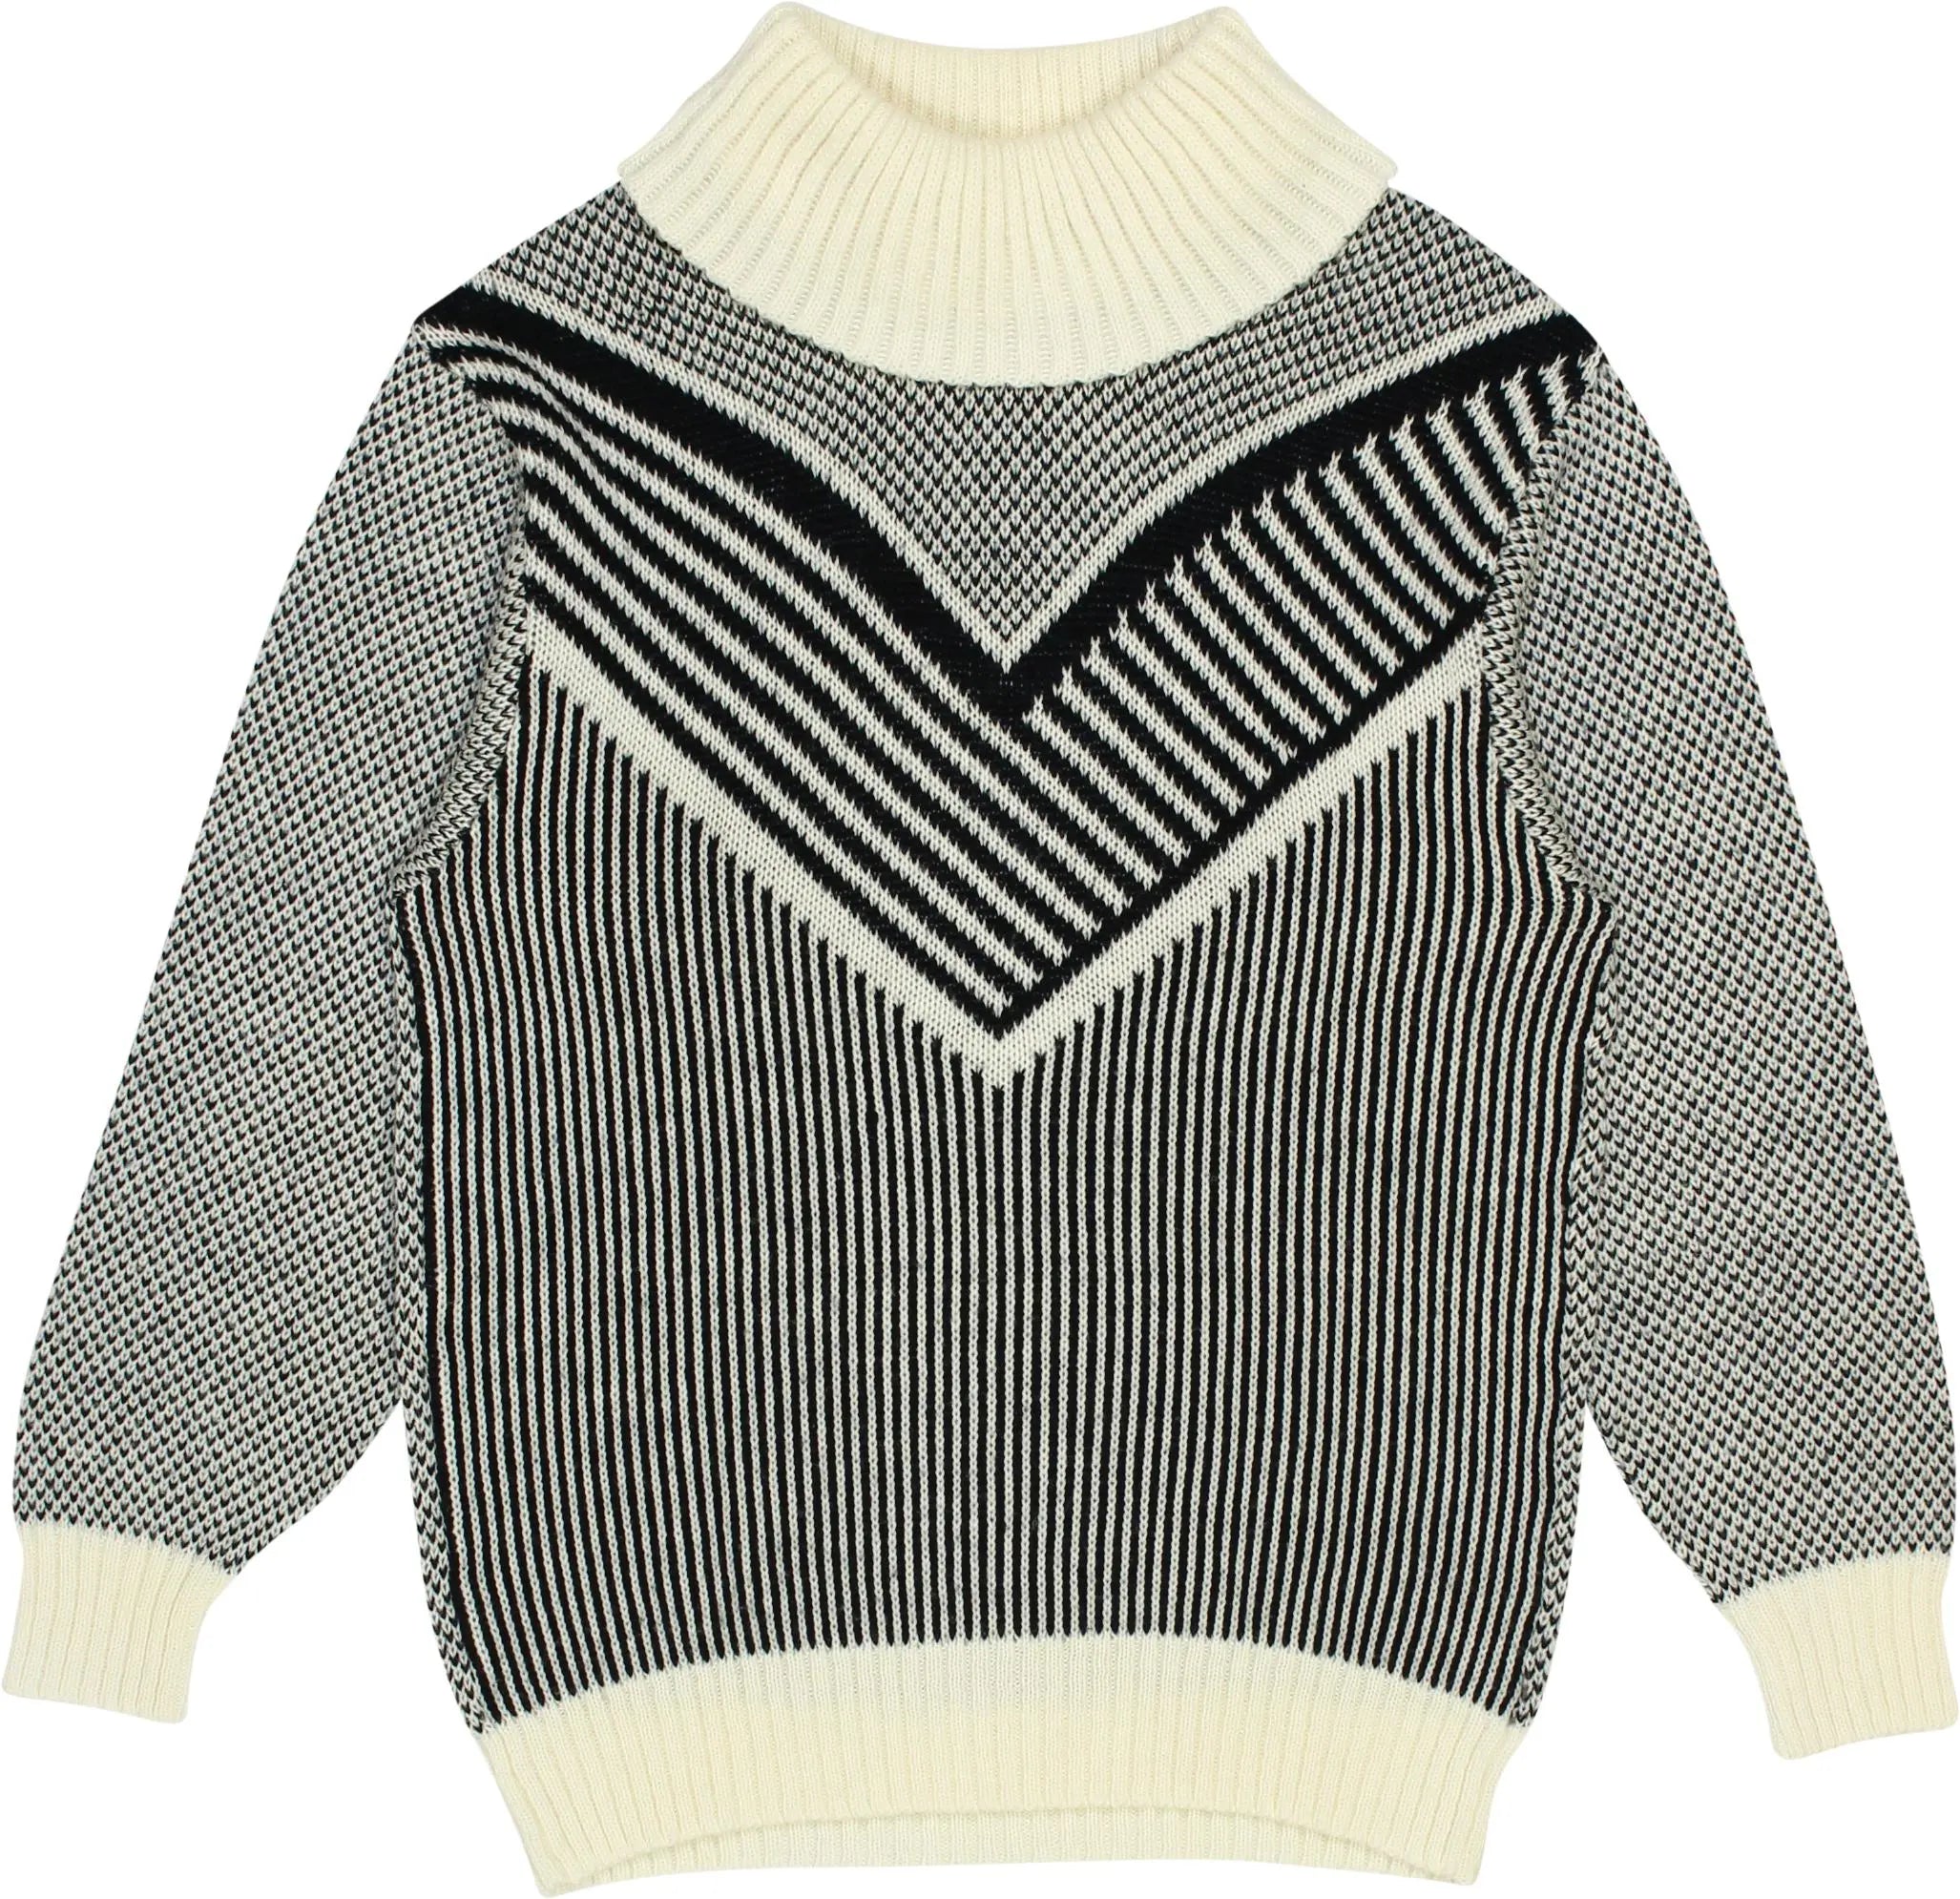 Unknown - 80/90s Knitted Turtleneck Jumper- ThriftTale.com - Vintage and second handclothing